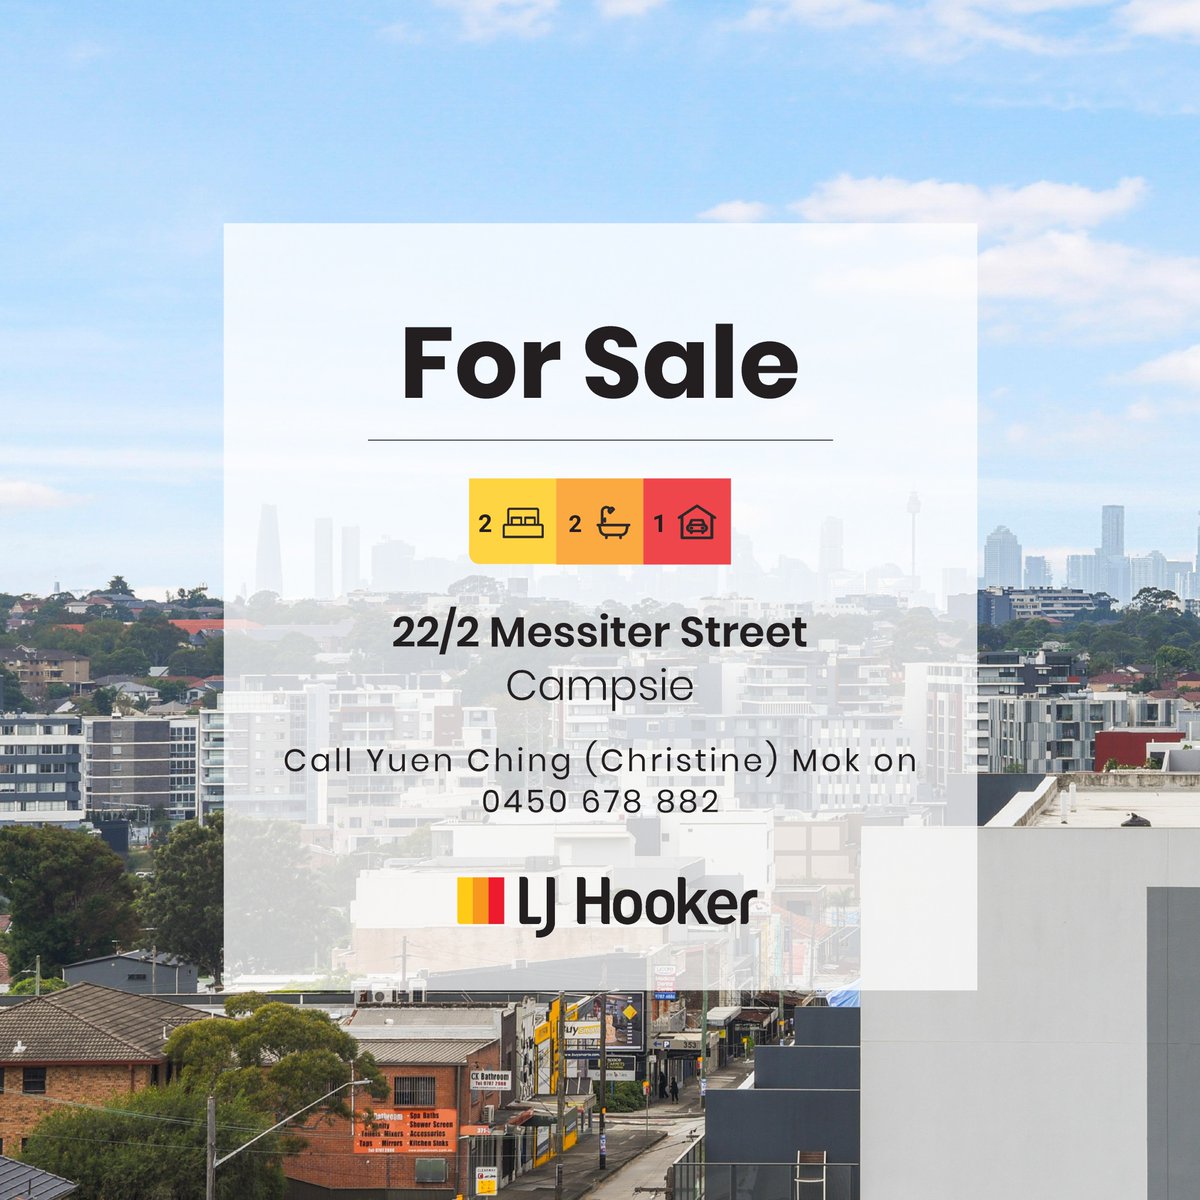 For Sale
Spacious 2 bedroom home in Campsie
Open this Saturday from 11 to 11.30 am
Call Yuen Ching (Christine) Mok on 0450 678 882
LJ Hooker Hurstville

#LJHooker #LJHookerHurstville #LJH #YKWYK #YouKnowWhenyouKnow #Hurstville #LouieJovcevski #YuenChingMok #forsale #campsie